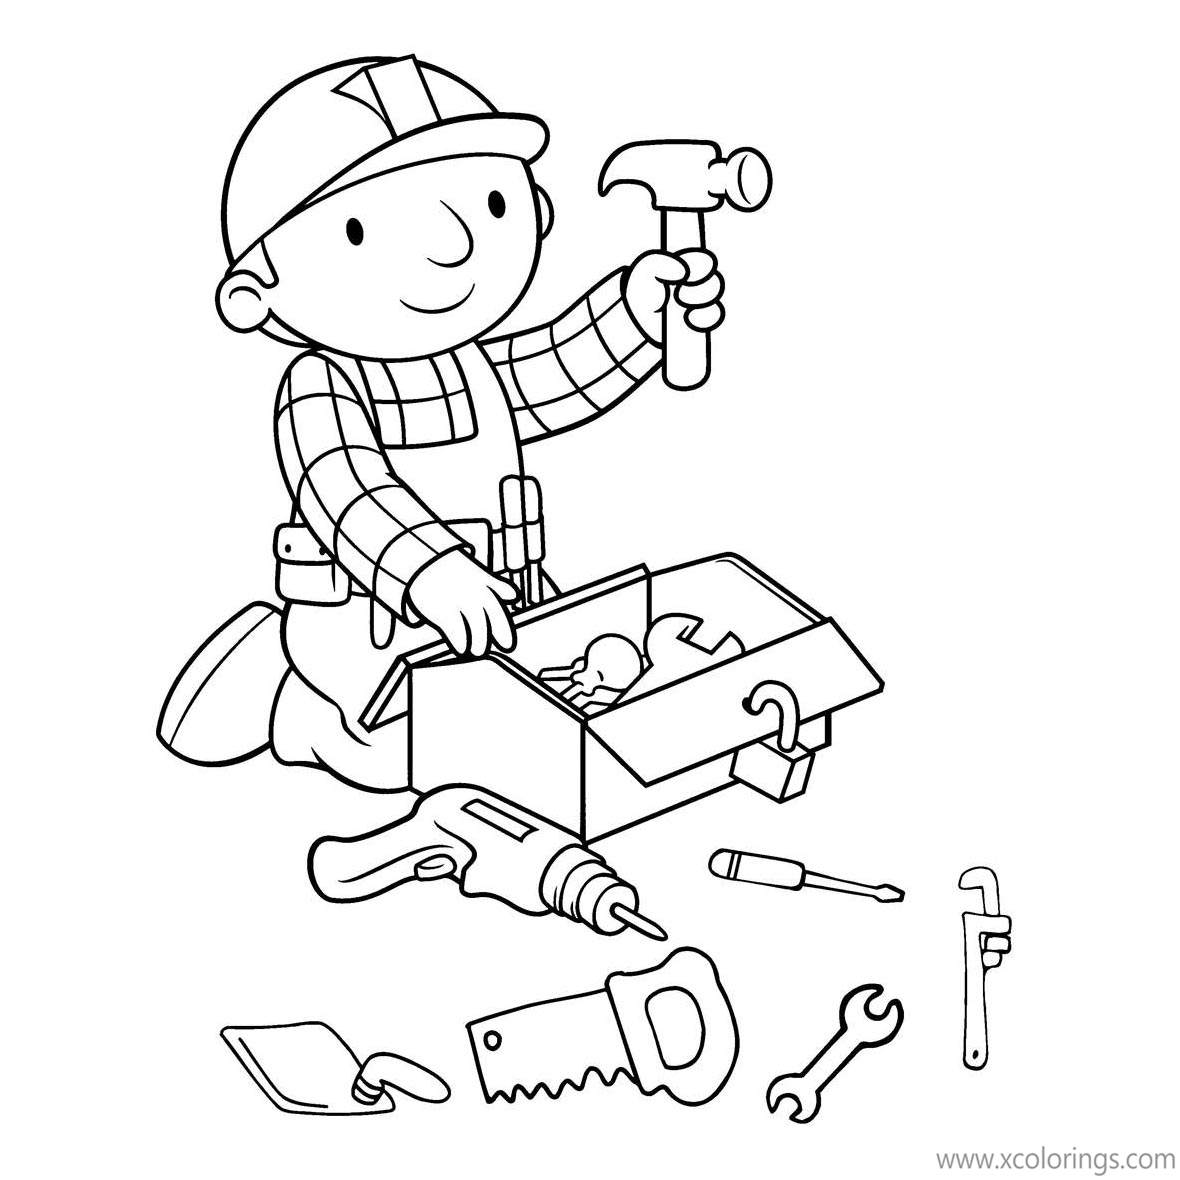 Free Bob The Builder Coloring Pages Bob with Toolkits printable